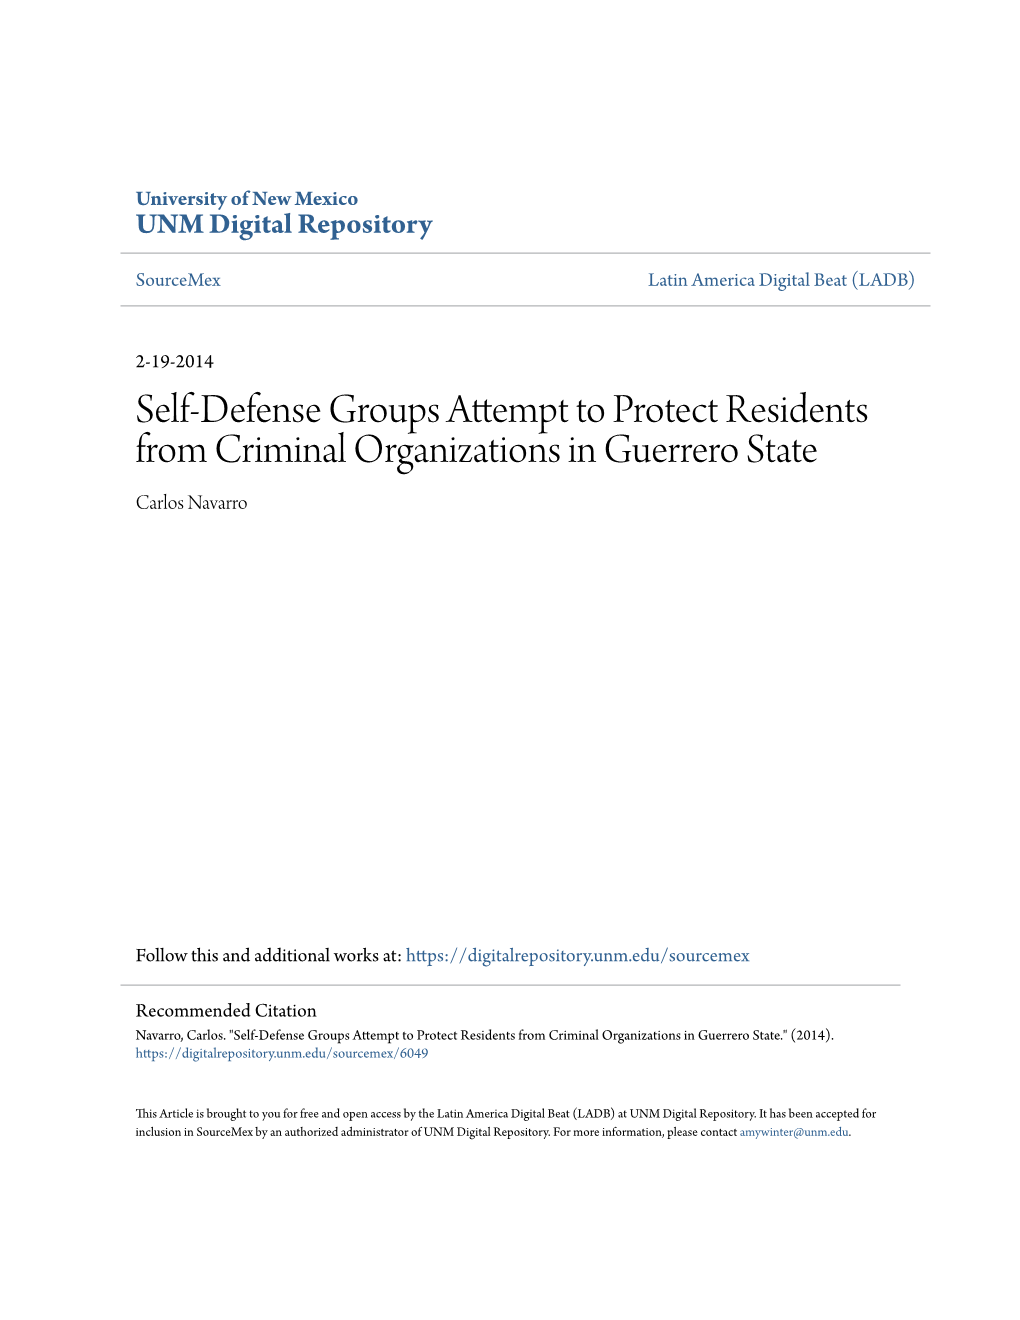 Self-Defense Groups Attempt to Protect Residents from Criminal Organizations in Guerrero State Carlos Navarro